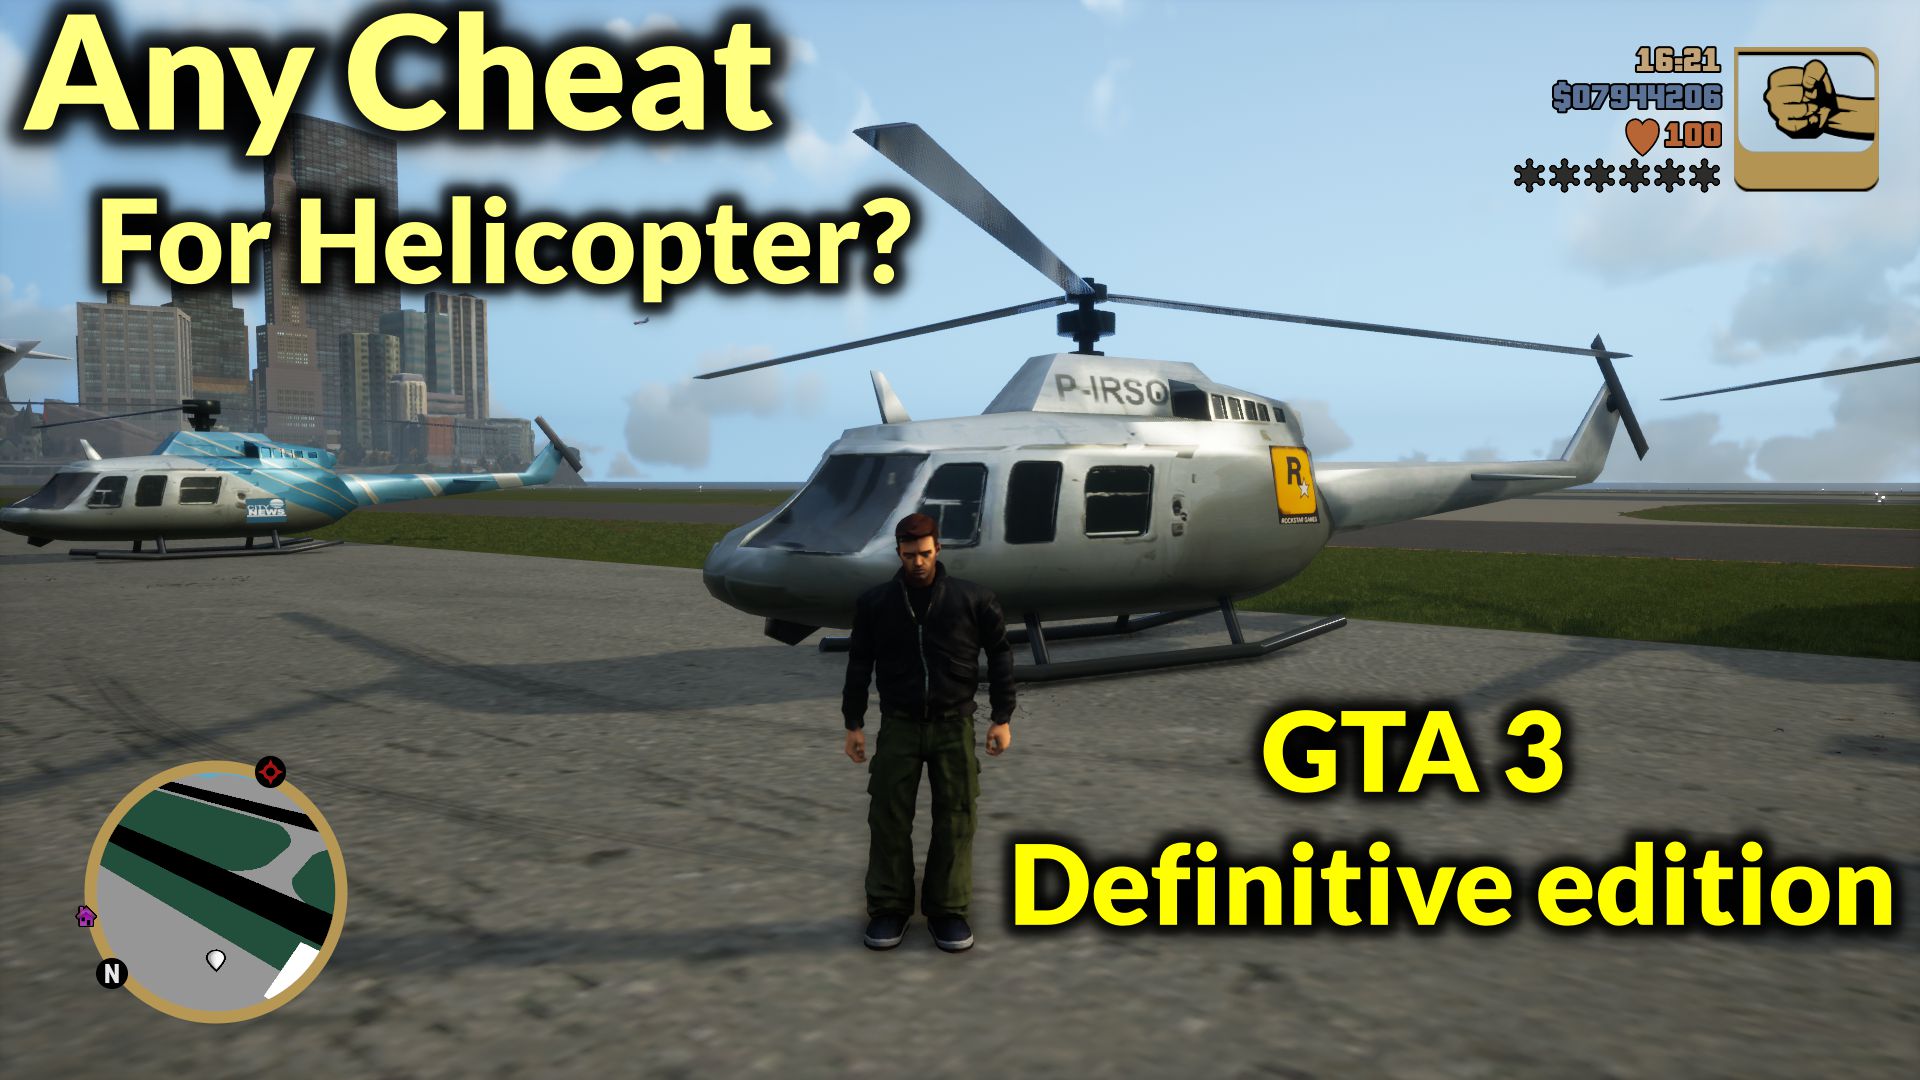 Is there any helicopter cheat in GTA 3 definitive edition